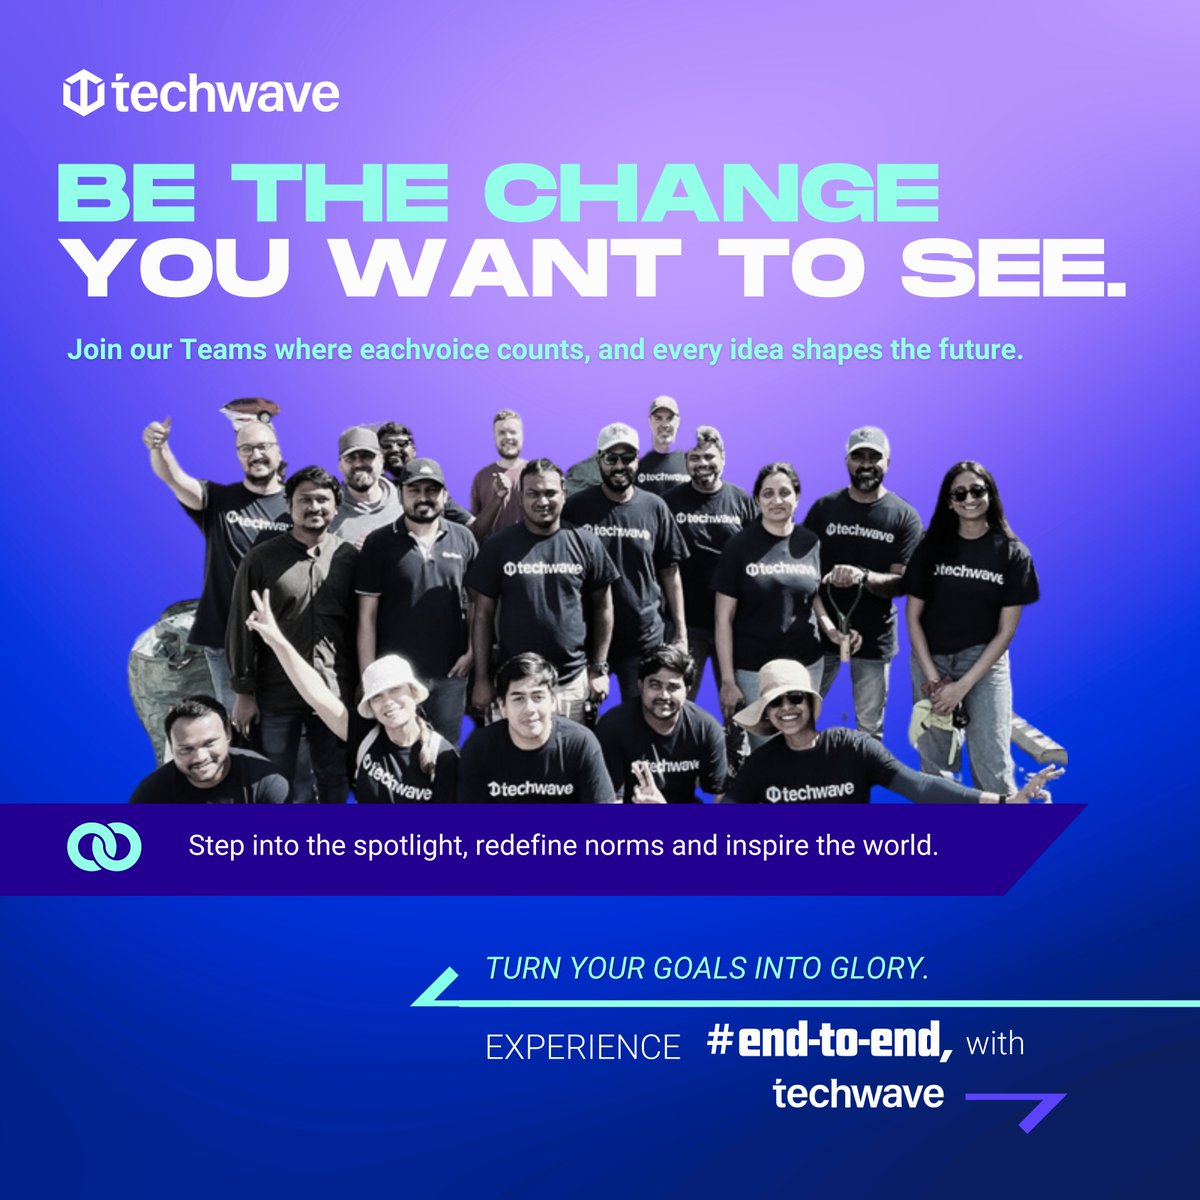 Your ideas shape our tomorrow. Techwave is a haven for thought leaders to flourish. Join our journey, where we challenge conventions and set new benchmarks. Together, let's redefine possibilities, end to end. Connect with us to be part of the change - techwave.net/careers/